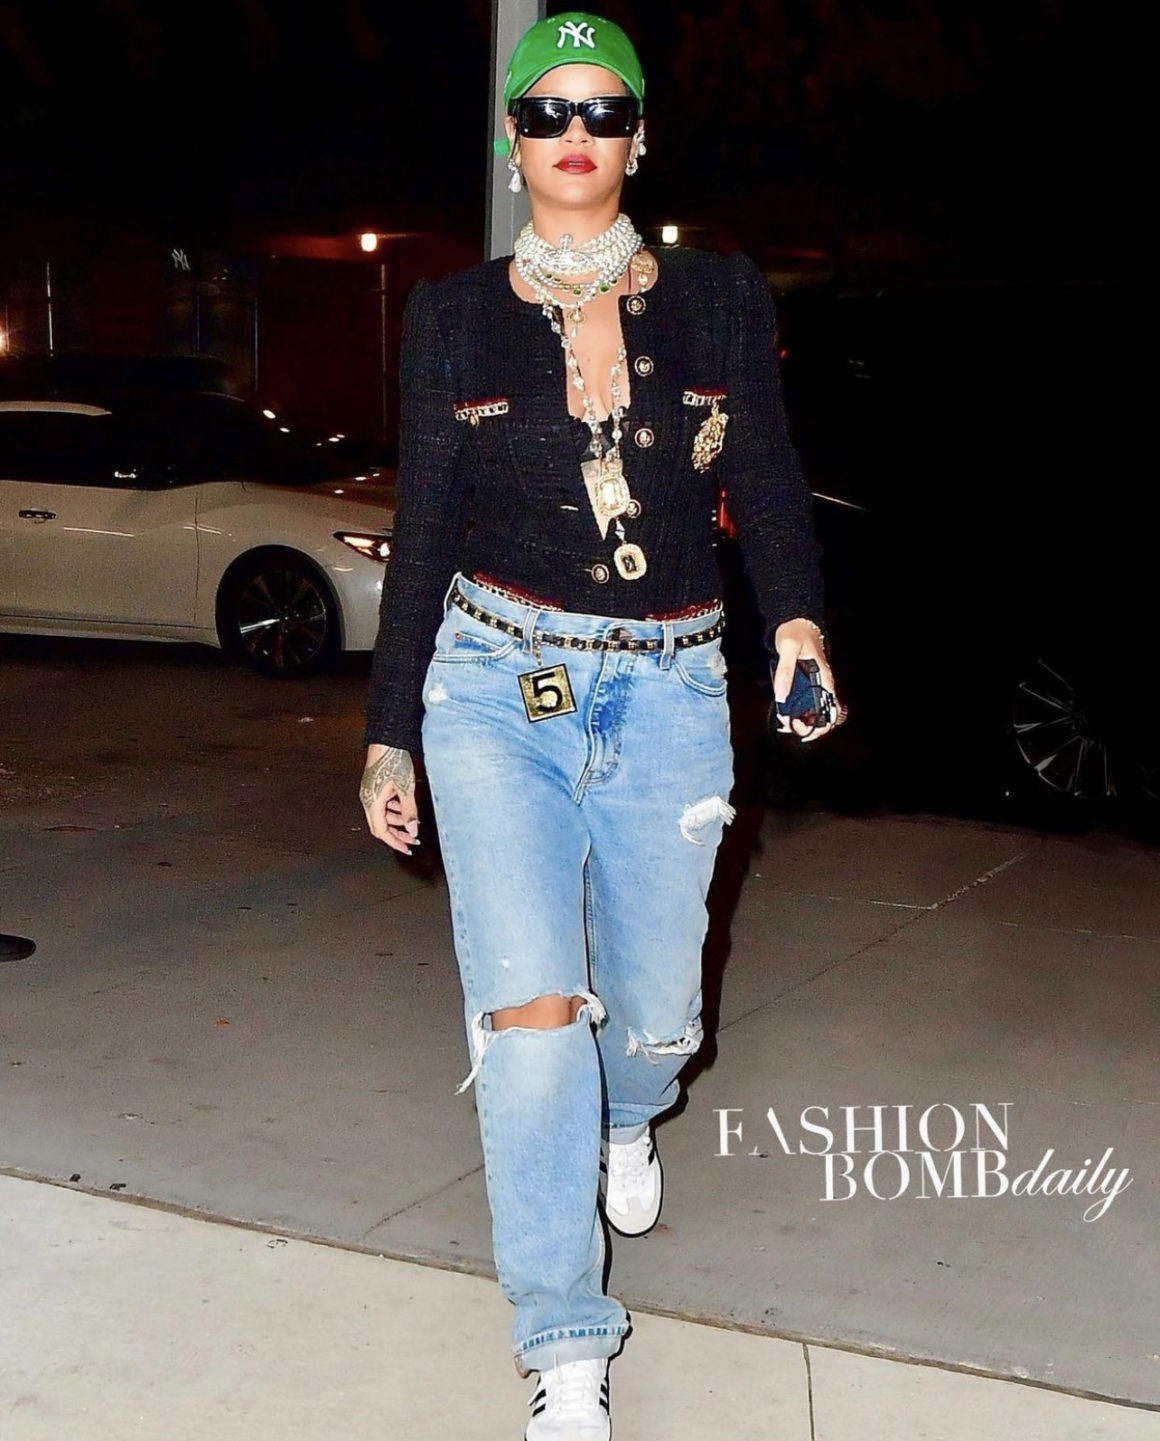 Rihanna Makes Grocery Store Runs Look Cool Wearing Tweed Jacket, Distressed  Jeans, and Green Baseball Cap Paired Chain and Pearl Accessories – Fashion  Bomb Daily